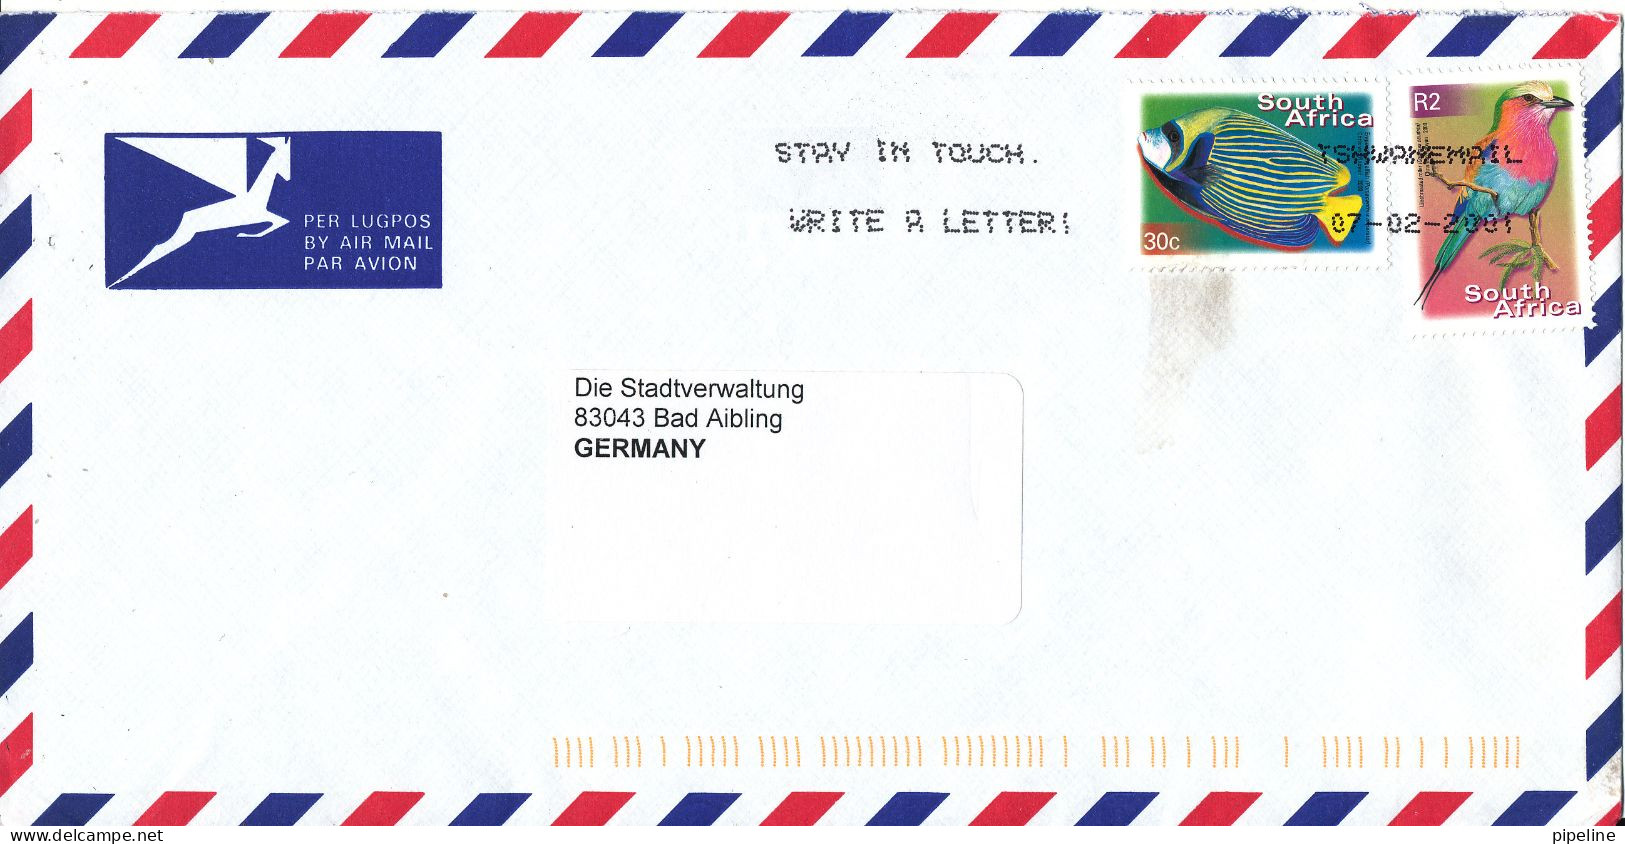 South Africa Air Mail Cover Sent To Germany 7-2-2001 Topic Stamps BIRD And FISH - Posta Aerea